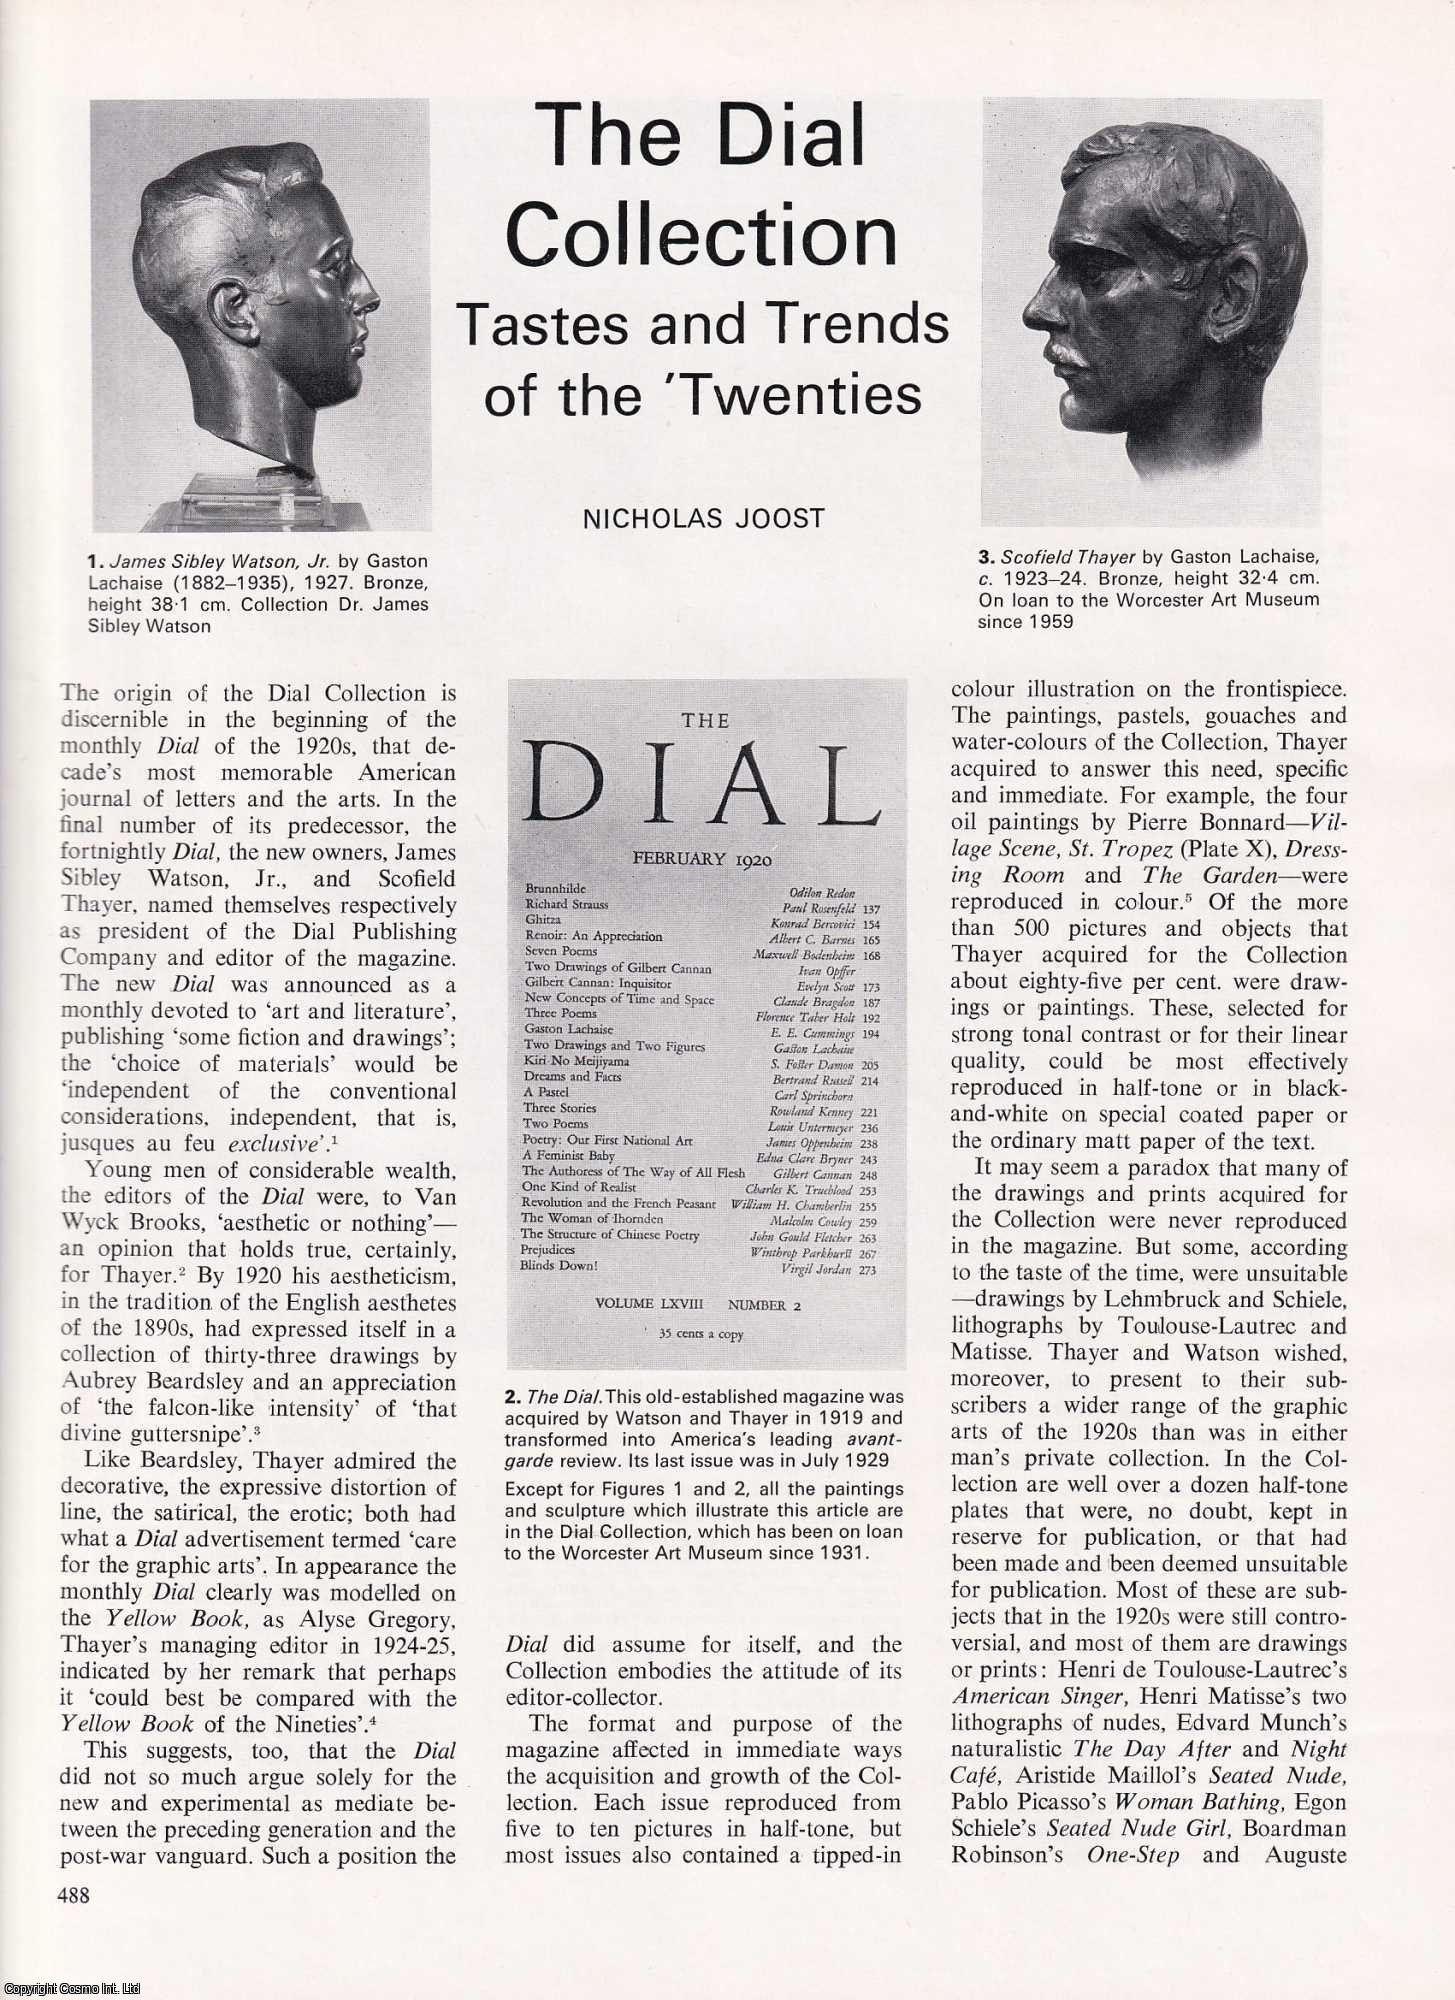 Nicholas Joost - The Dial Collection. Tastes and Trends of the 'Twenties. The American Journal of Letters and the Arts. An uncommon original article from Apollo, the Magazine of the Arts, 1971.